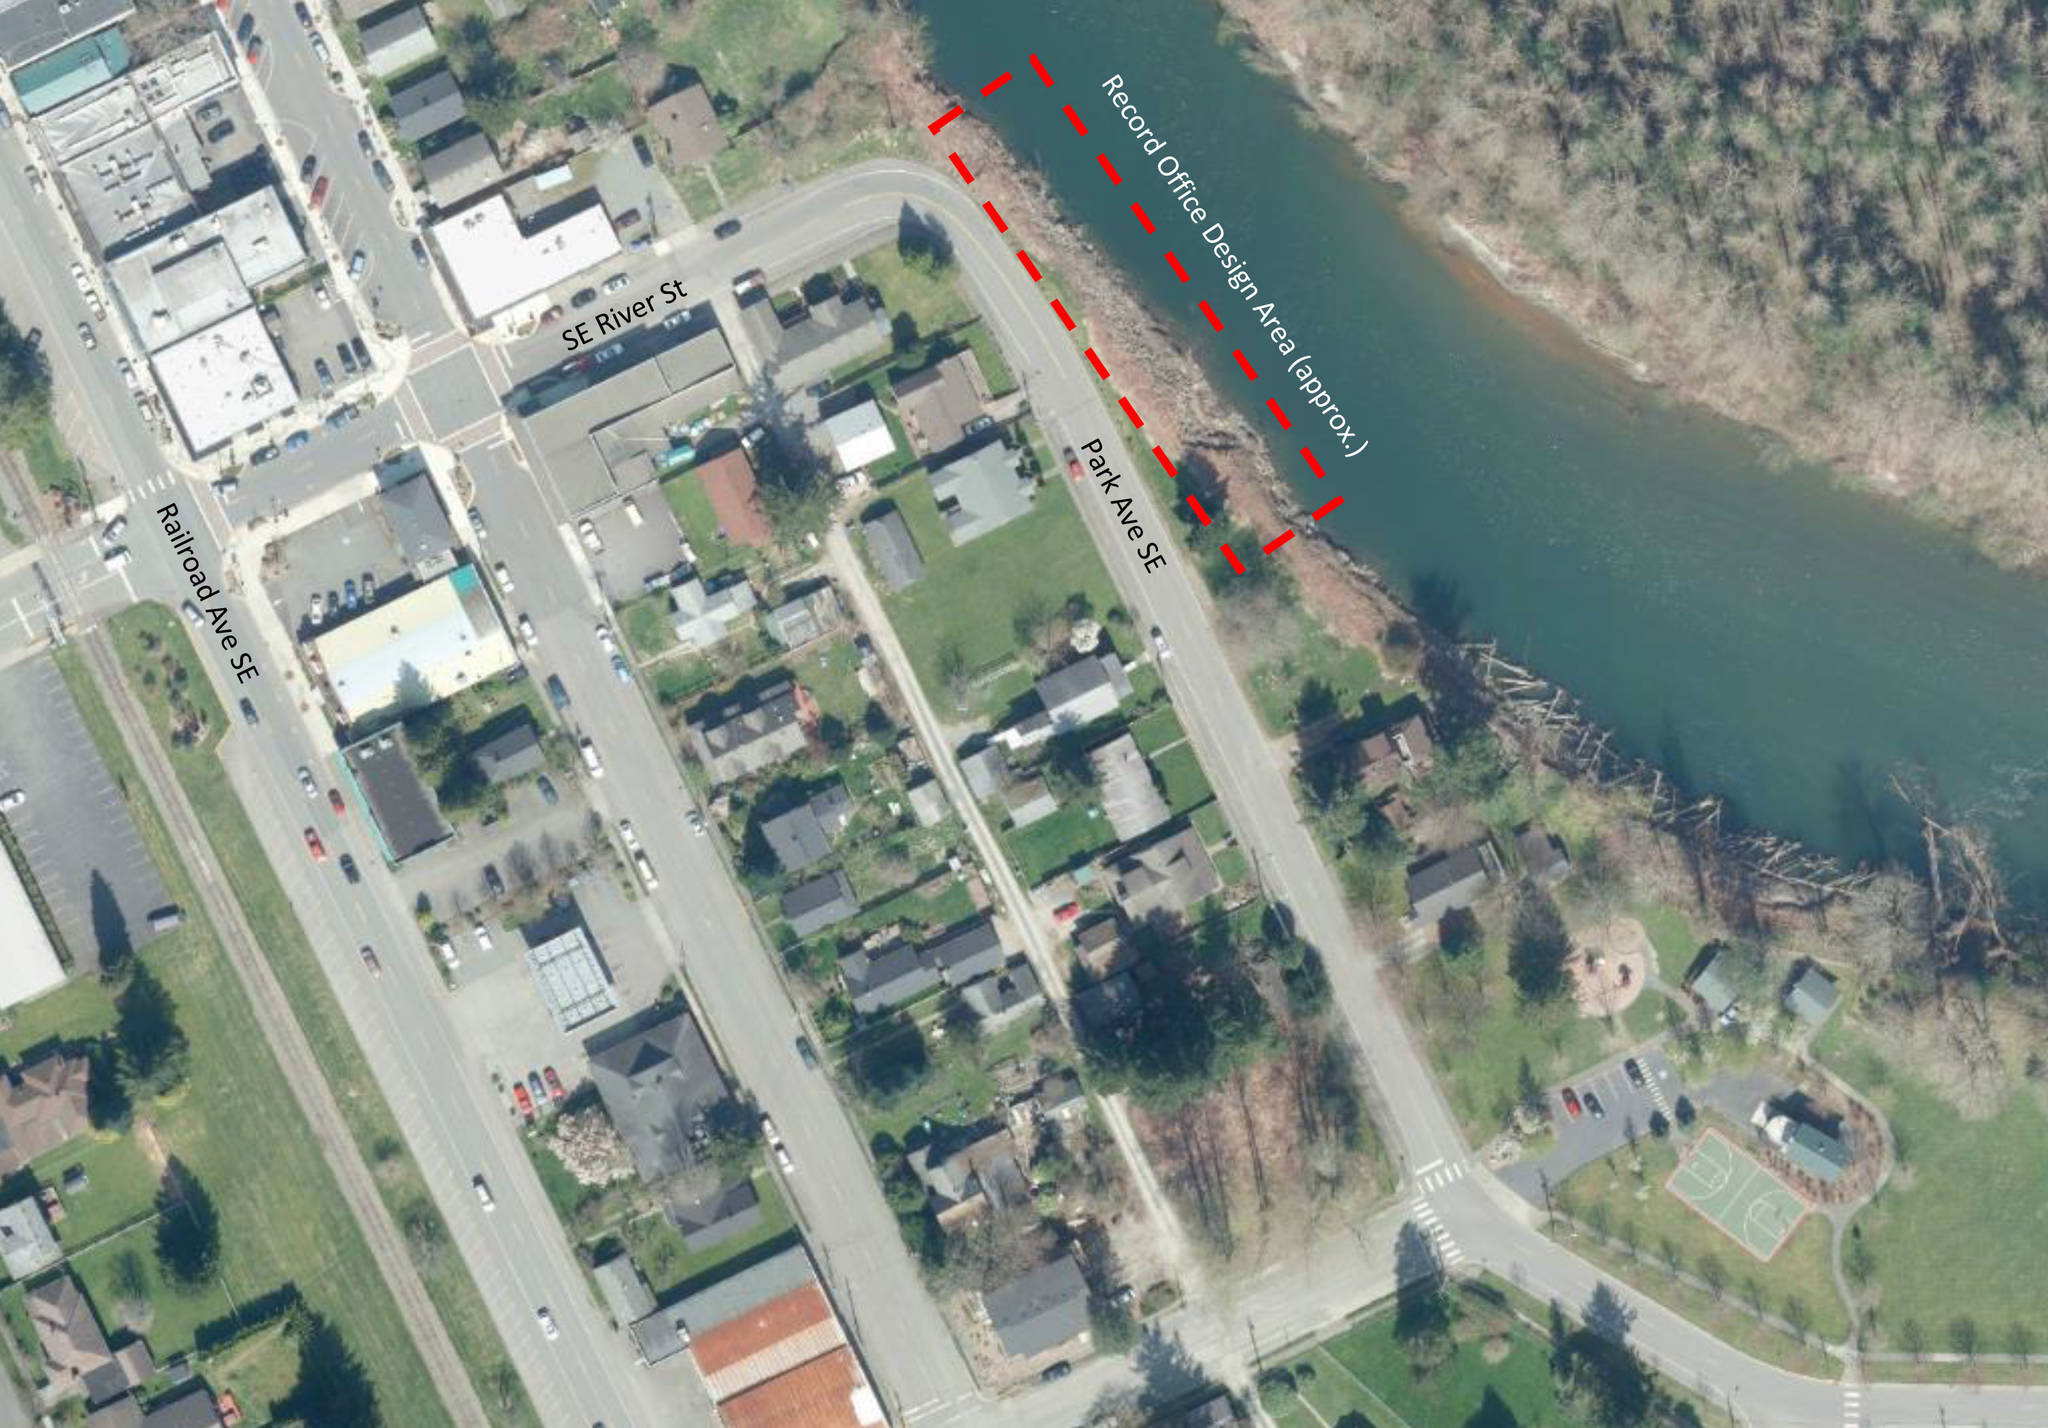 The section of riverbank just off the corner of SE River Street and Park Avenue SE in downtown Snoqualmie, is planned to be stabilized with the installation of revetments. Courtesy Image